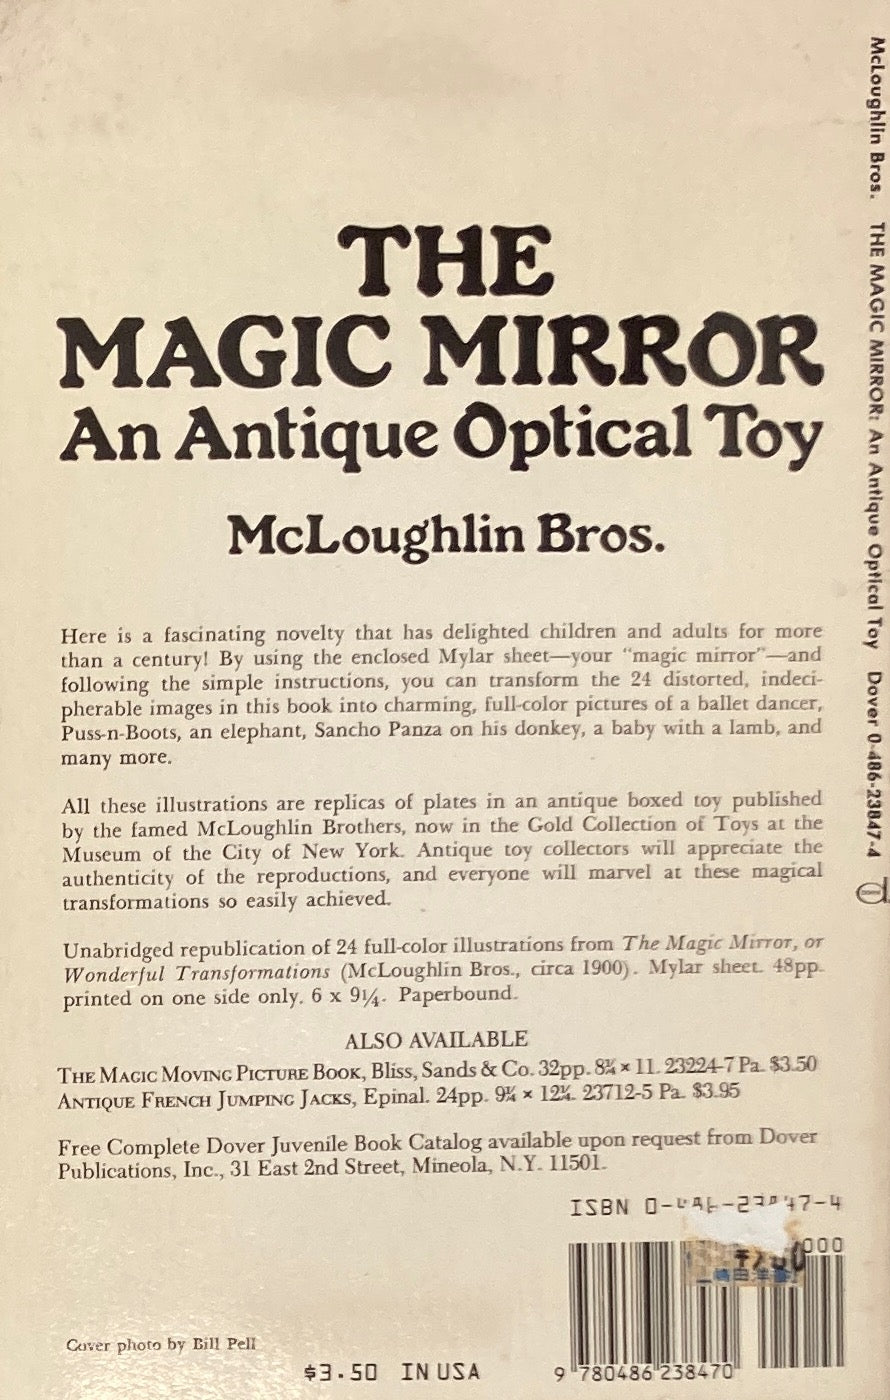 The Magic Mirror　An Antique Optical Toy　Flexible Mirror Included